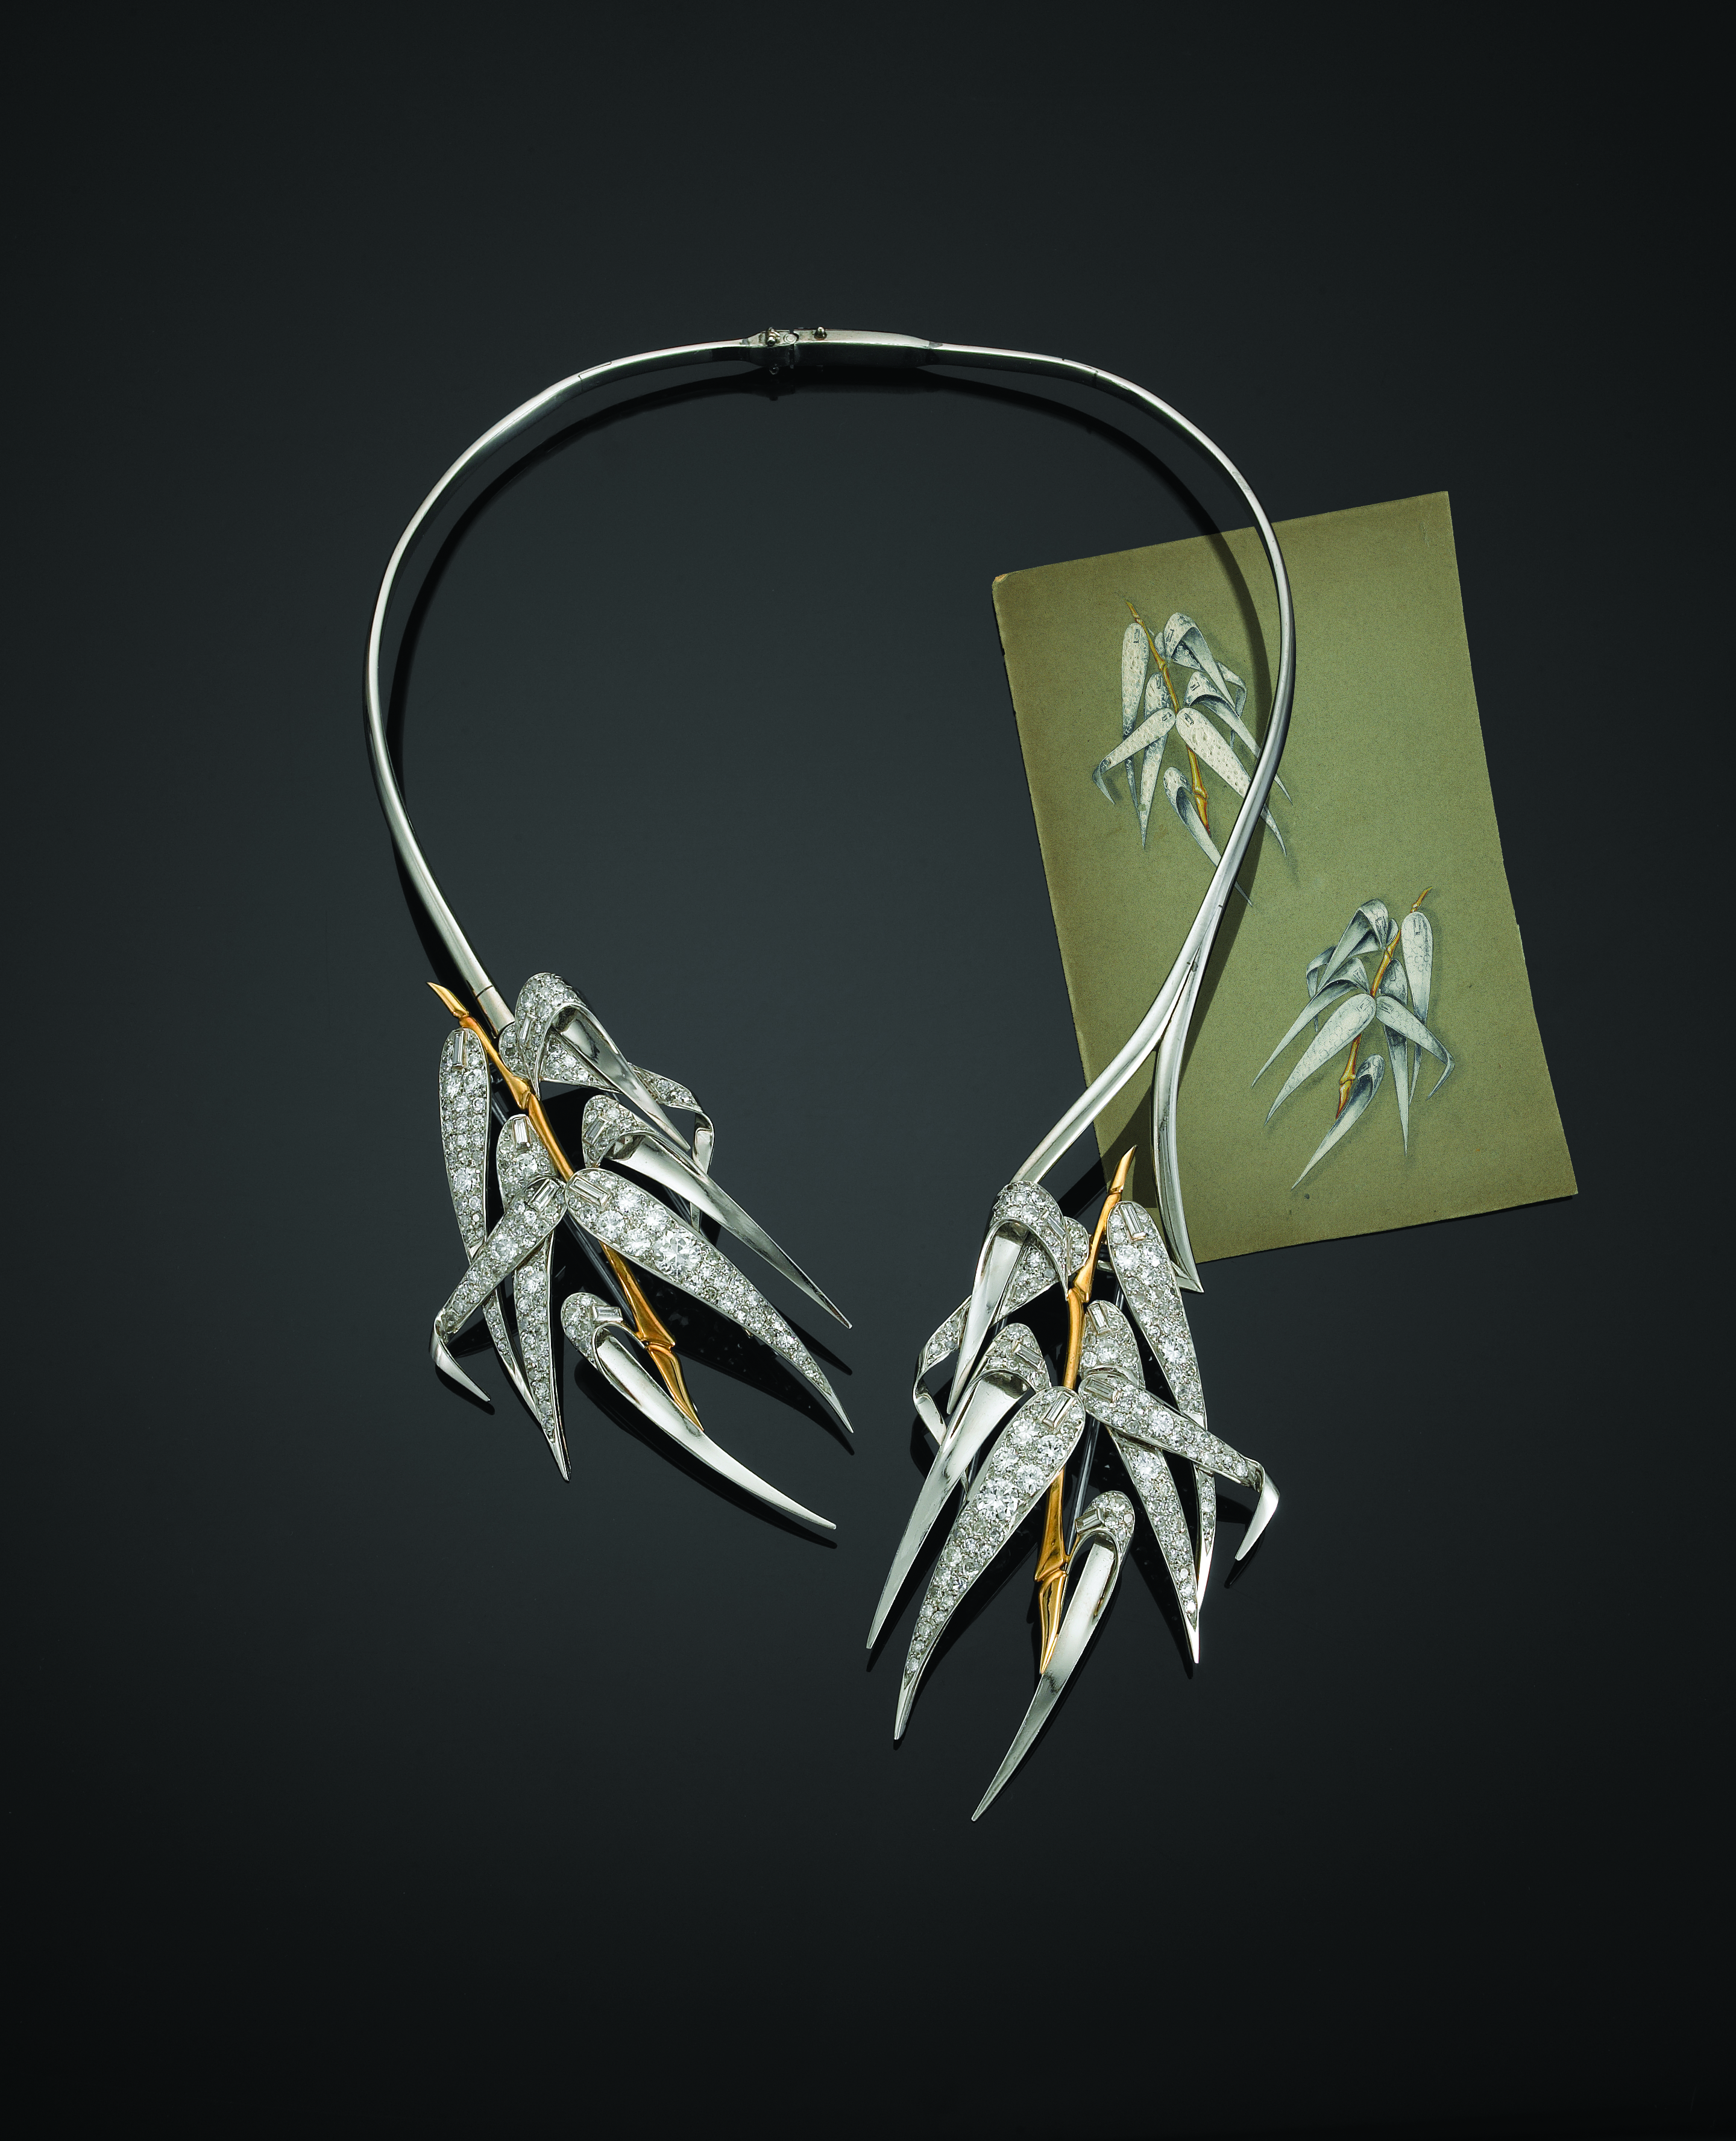 Bamboo motif necklace of diamonds and gold designed by Suzanne Belperron